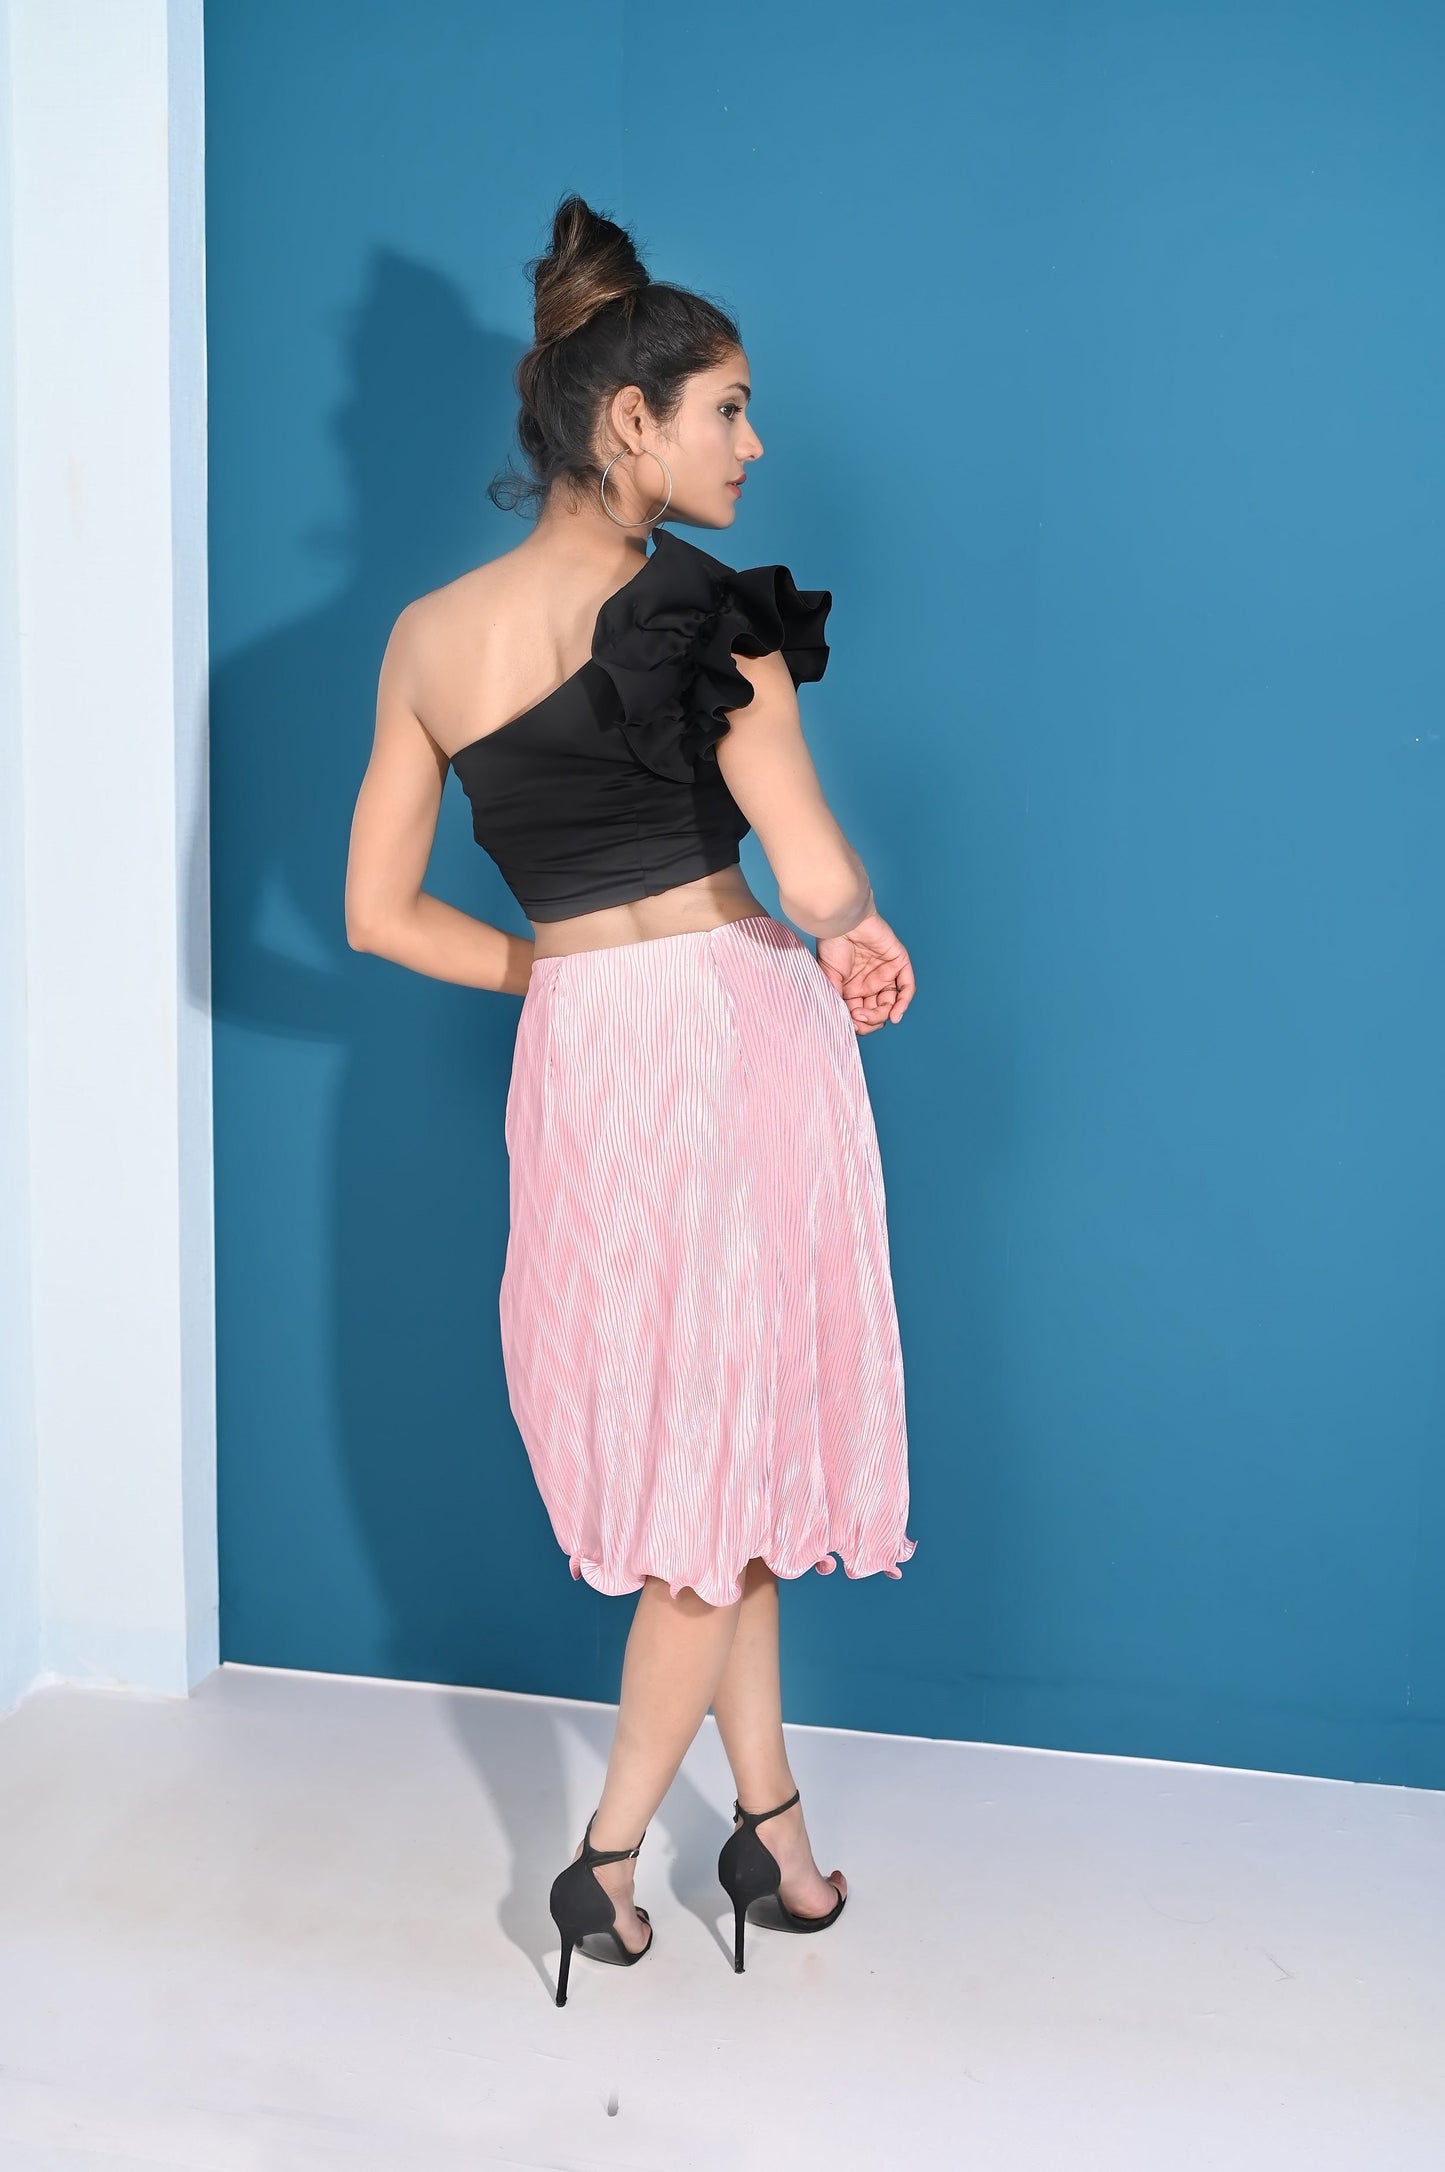 Luxurious Union of Knee-Length Skirt With One-Shoulder Crop Top | GlamzLife